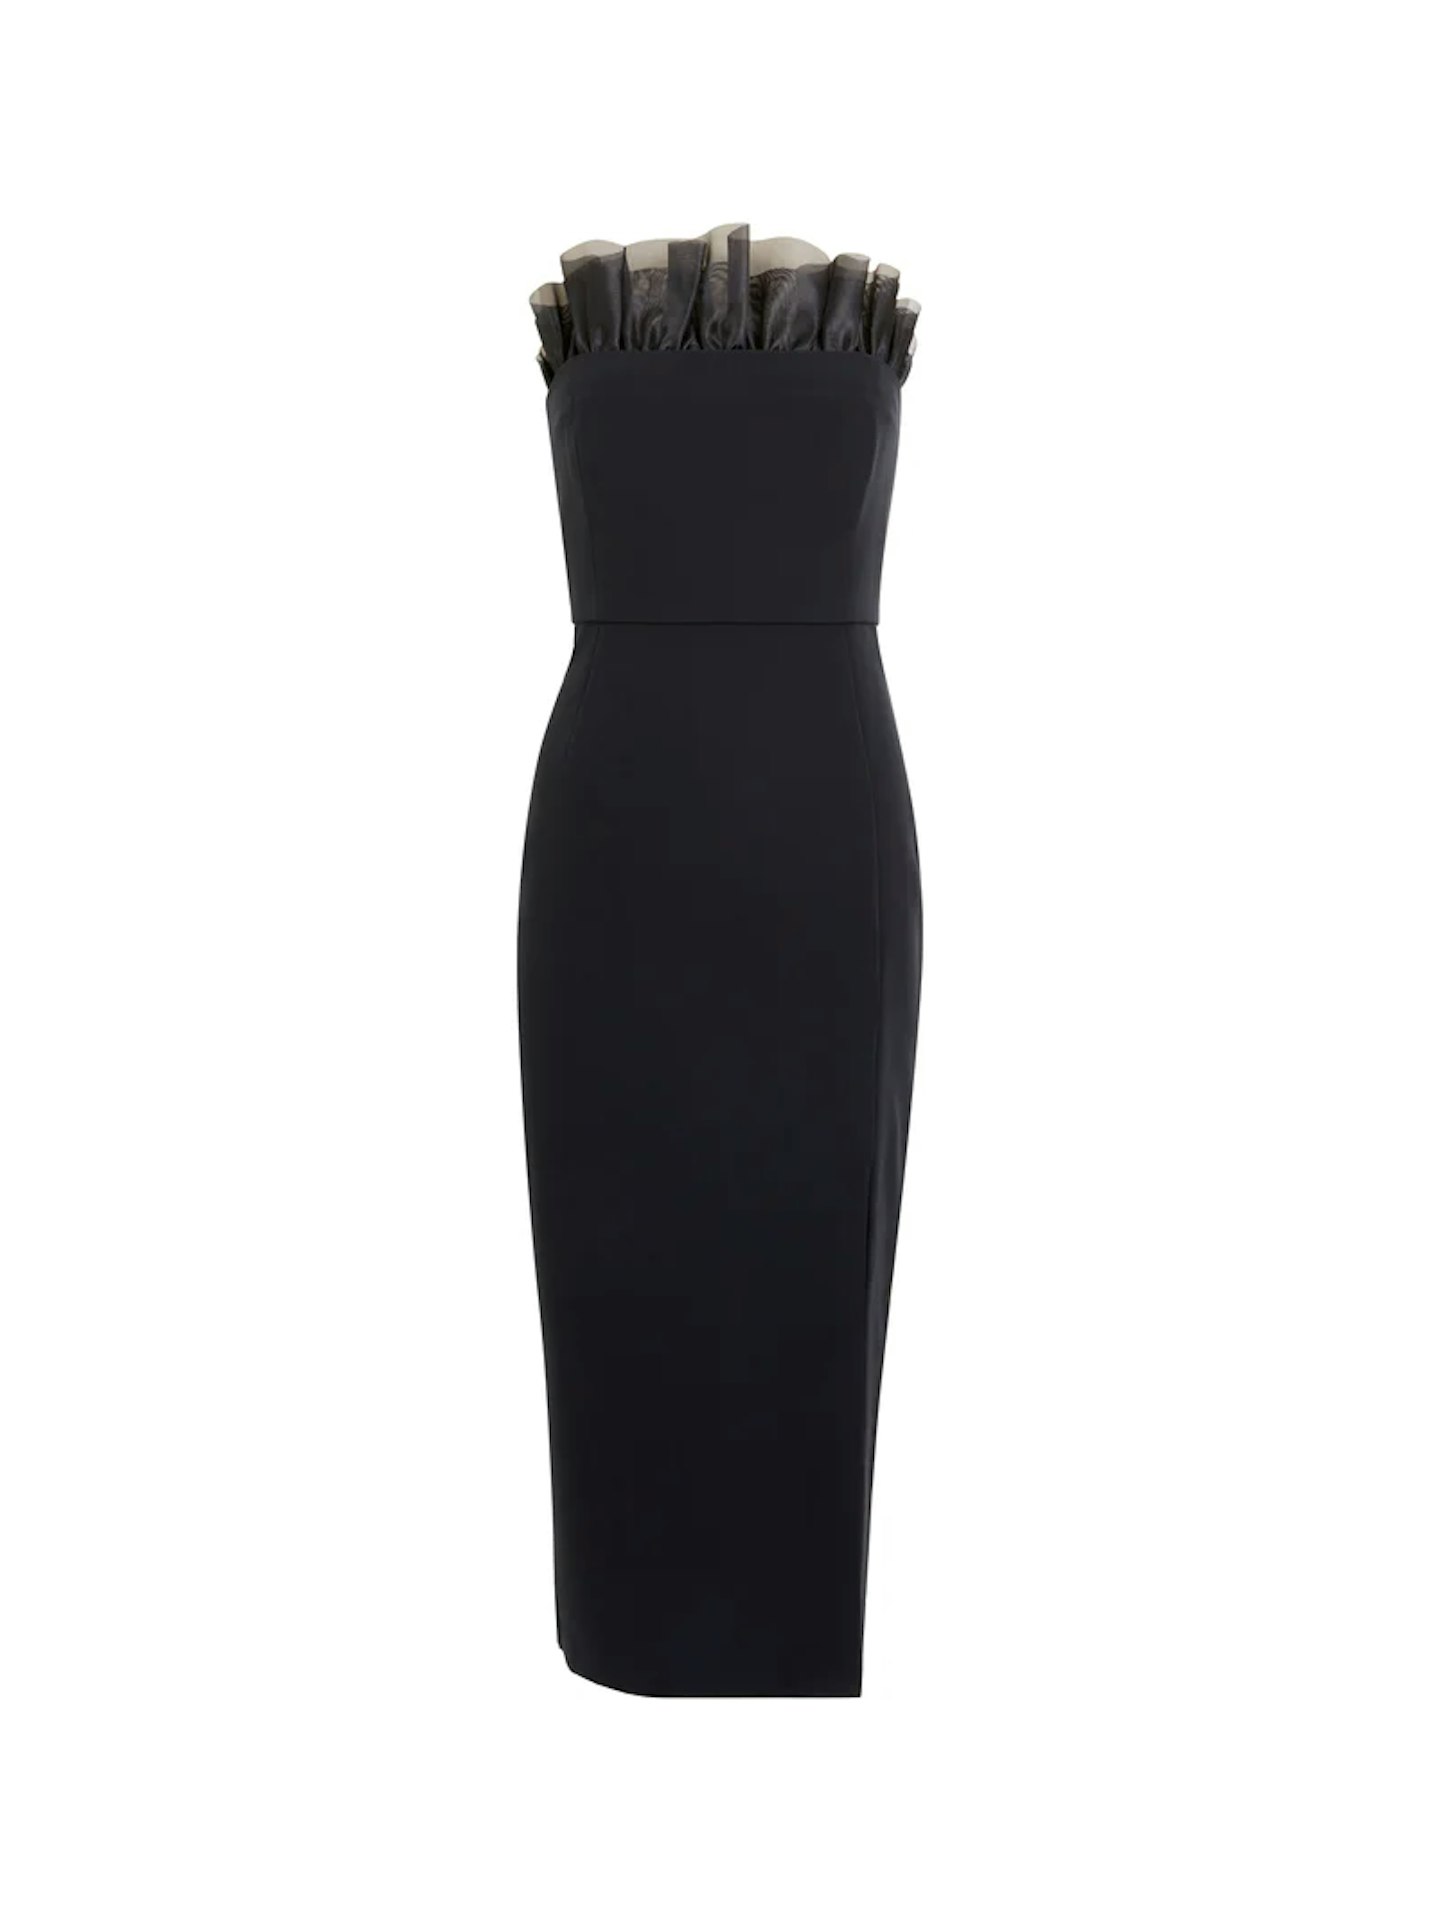 french connection black tie dress 